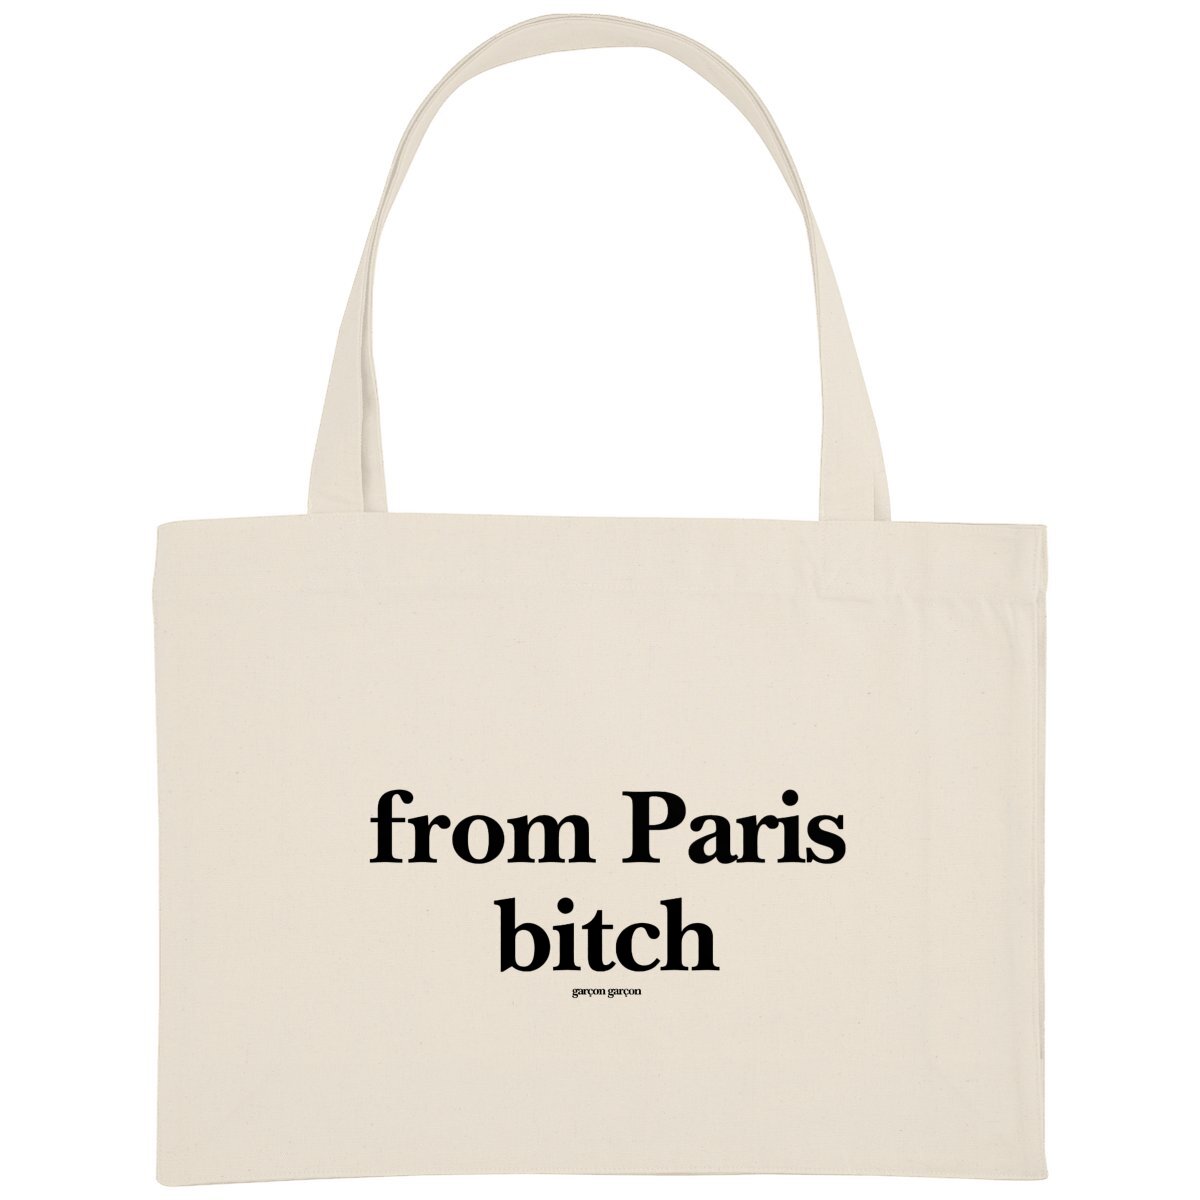 from Paris Bitch totebag. An eco-friendly cream-colored tote bag featuring the bold statement 'from Paris Bitch' in black typography, with the brand name 'garçon garçon' subtly placed underneath. A modern accessory that carries more than just your essentials—it carries a message of love and equality.